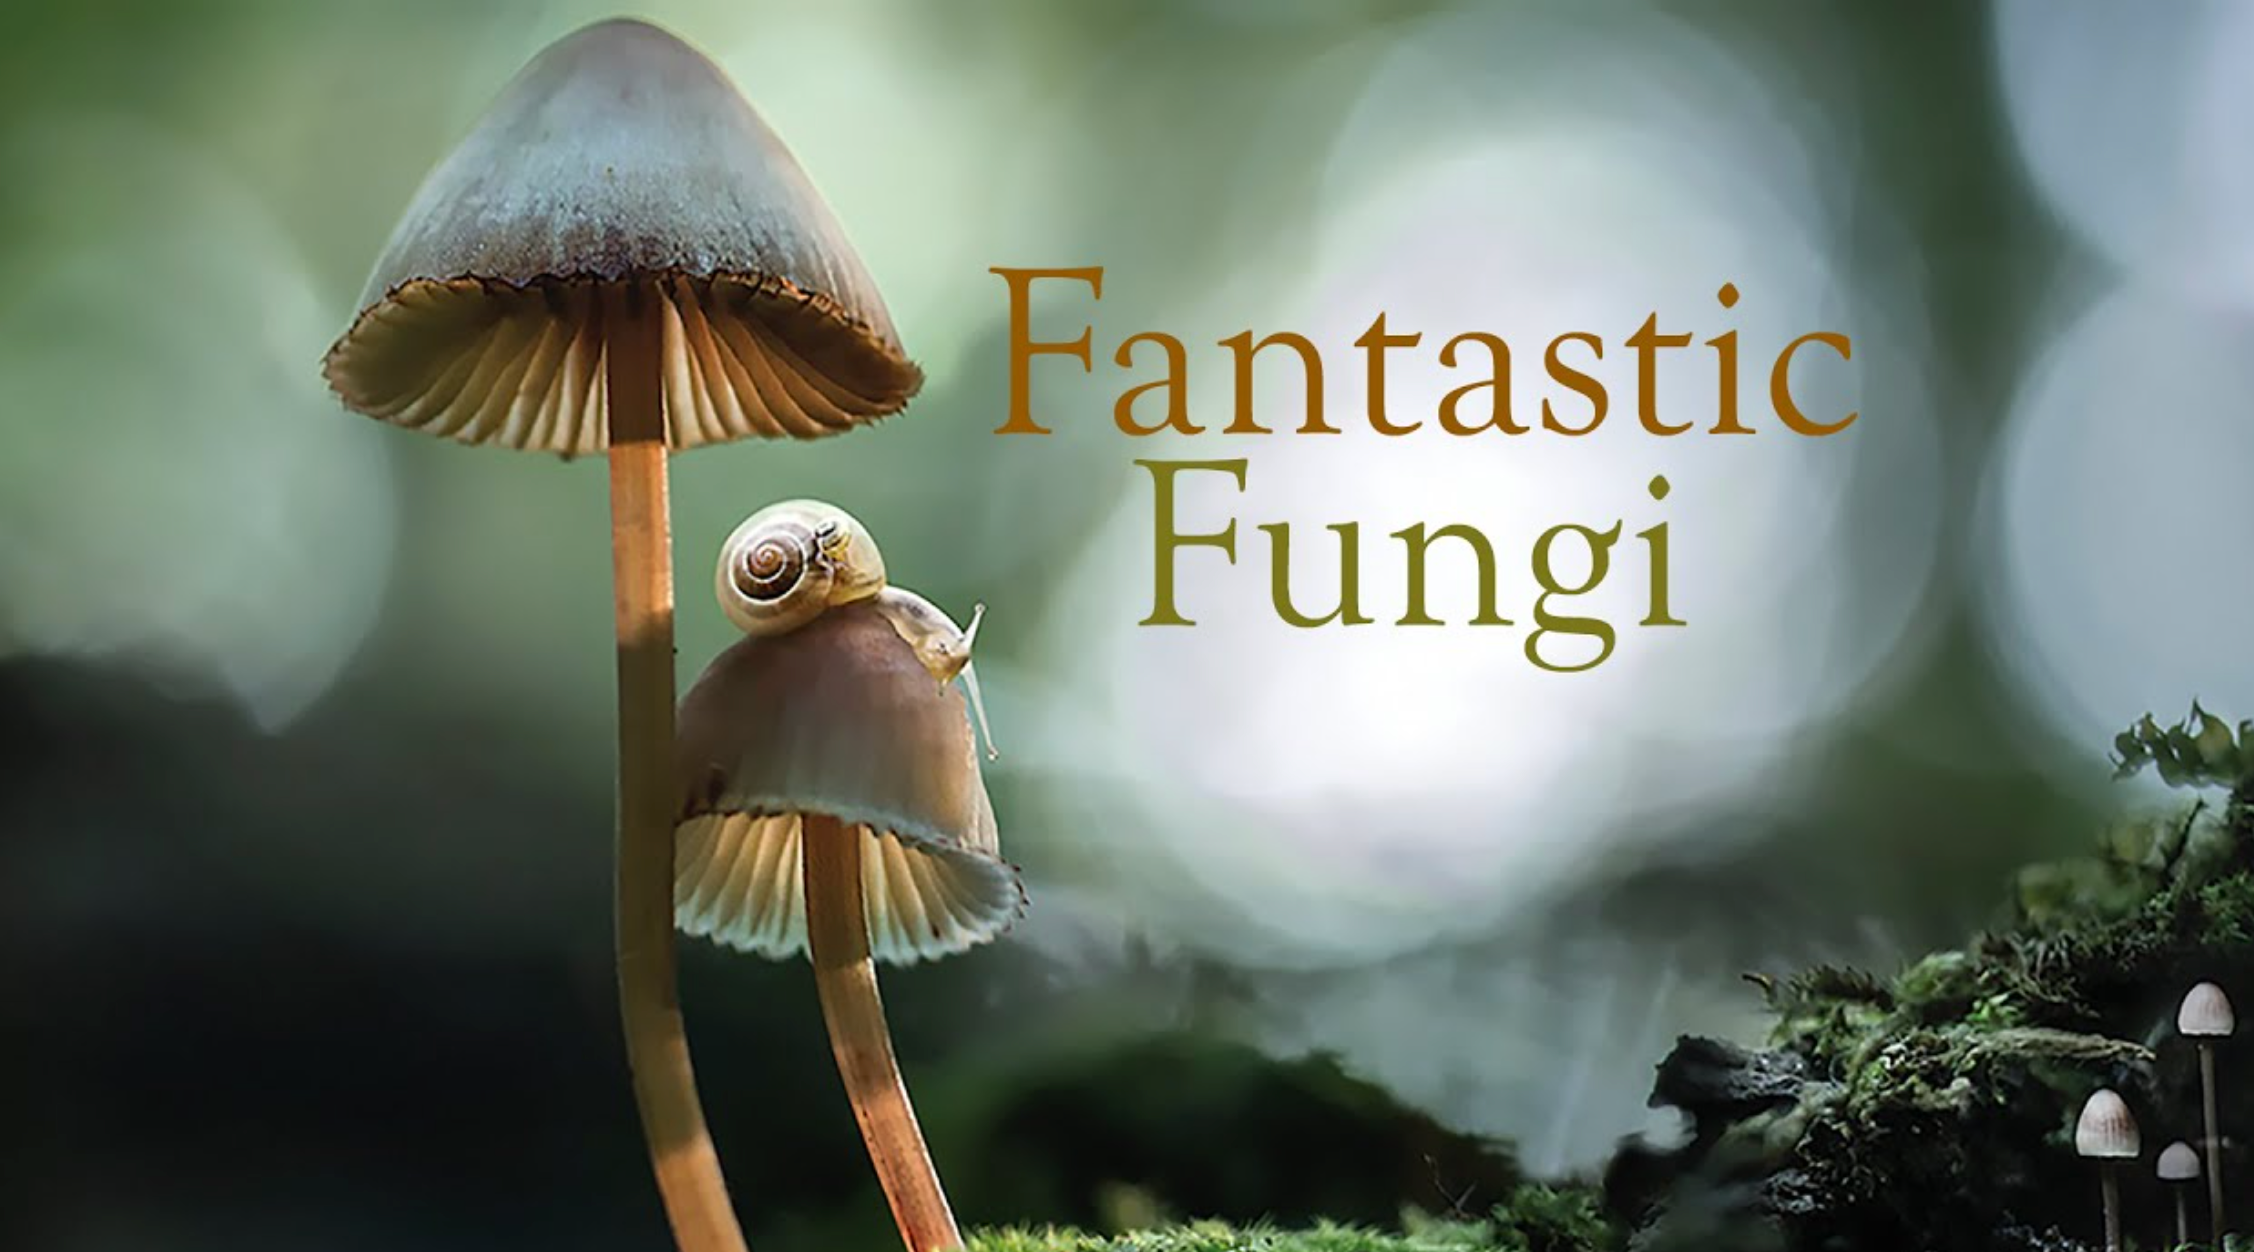 Fantastic Fungi Documentary: Top Takeaways, Quotes, Philosophies, and Lessons Learned